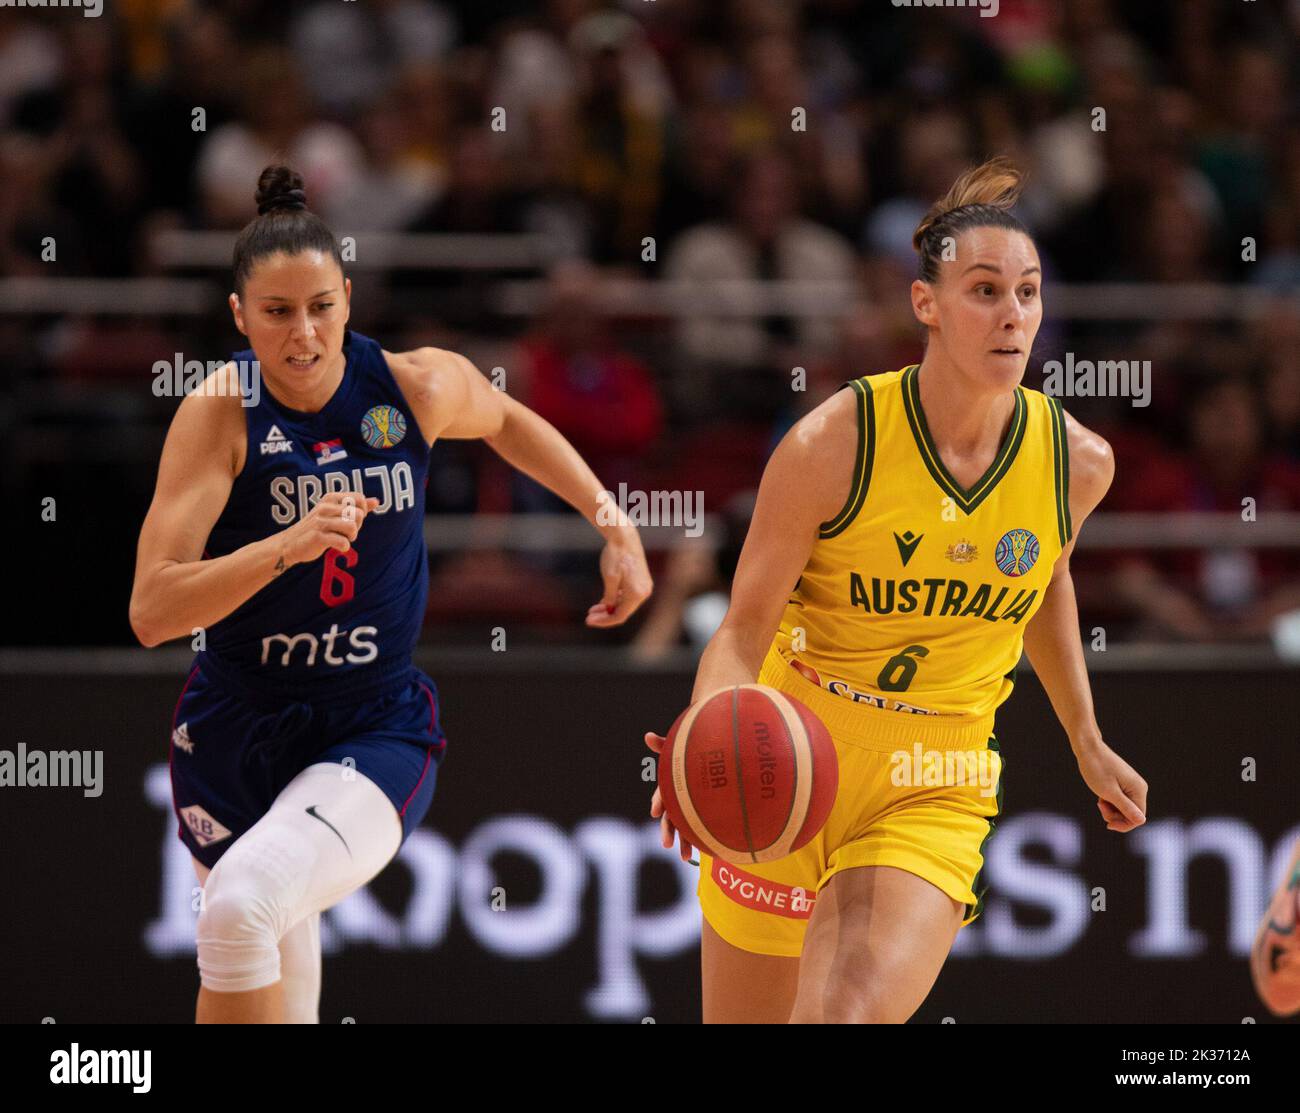 Sydney, Australia. 25th Sep, 2022. Steph Talbot (R) of Australia dribbles the ball during a Group B match against Serbia at the FIBA Women's Basketball World Cup 2022 in Sydney, Australia, Sept. 25, 2022. Credit: Hu Jingchen/Xinhua/Alamy Live News Stock Photo